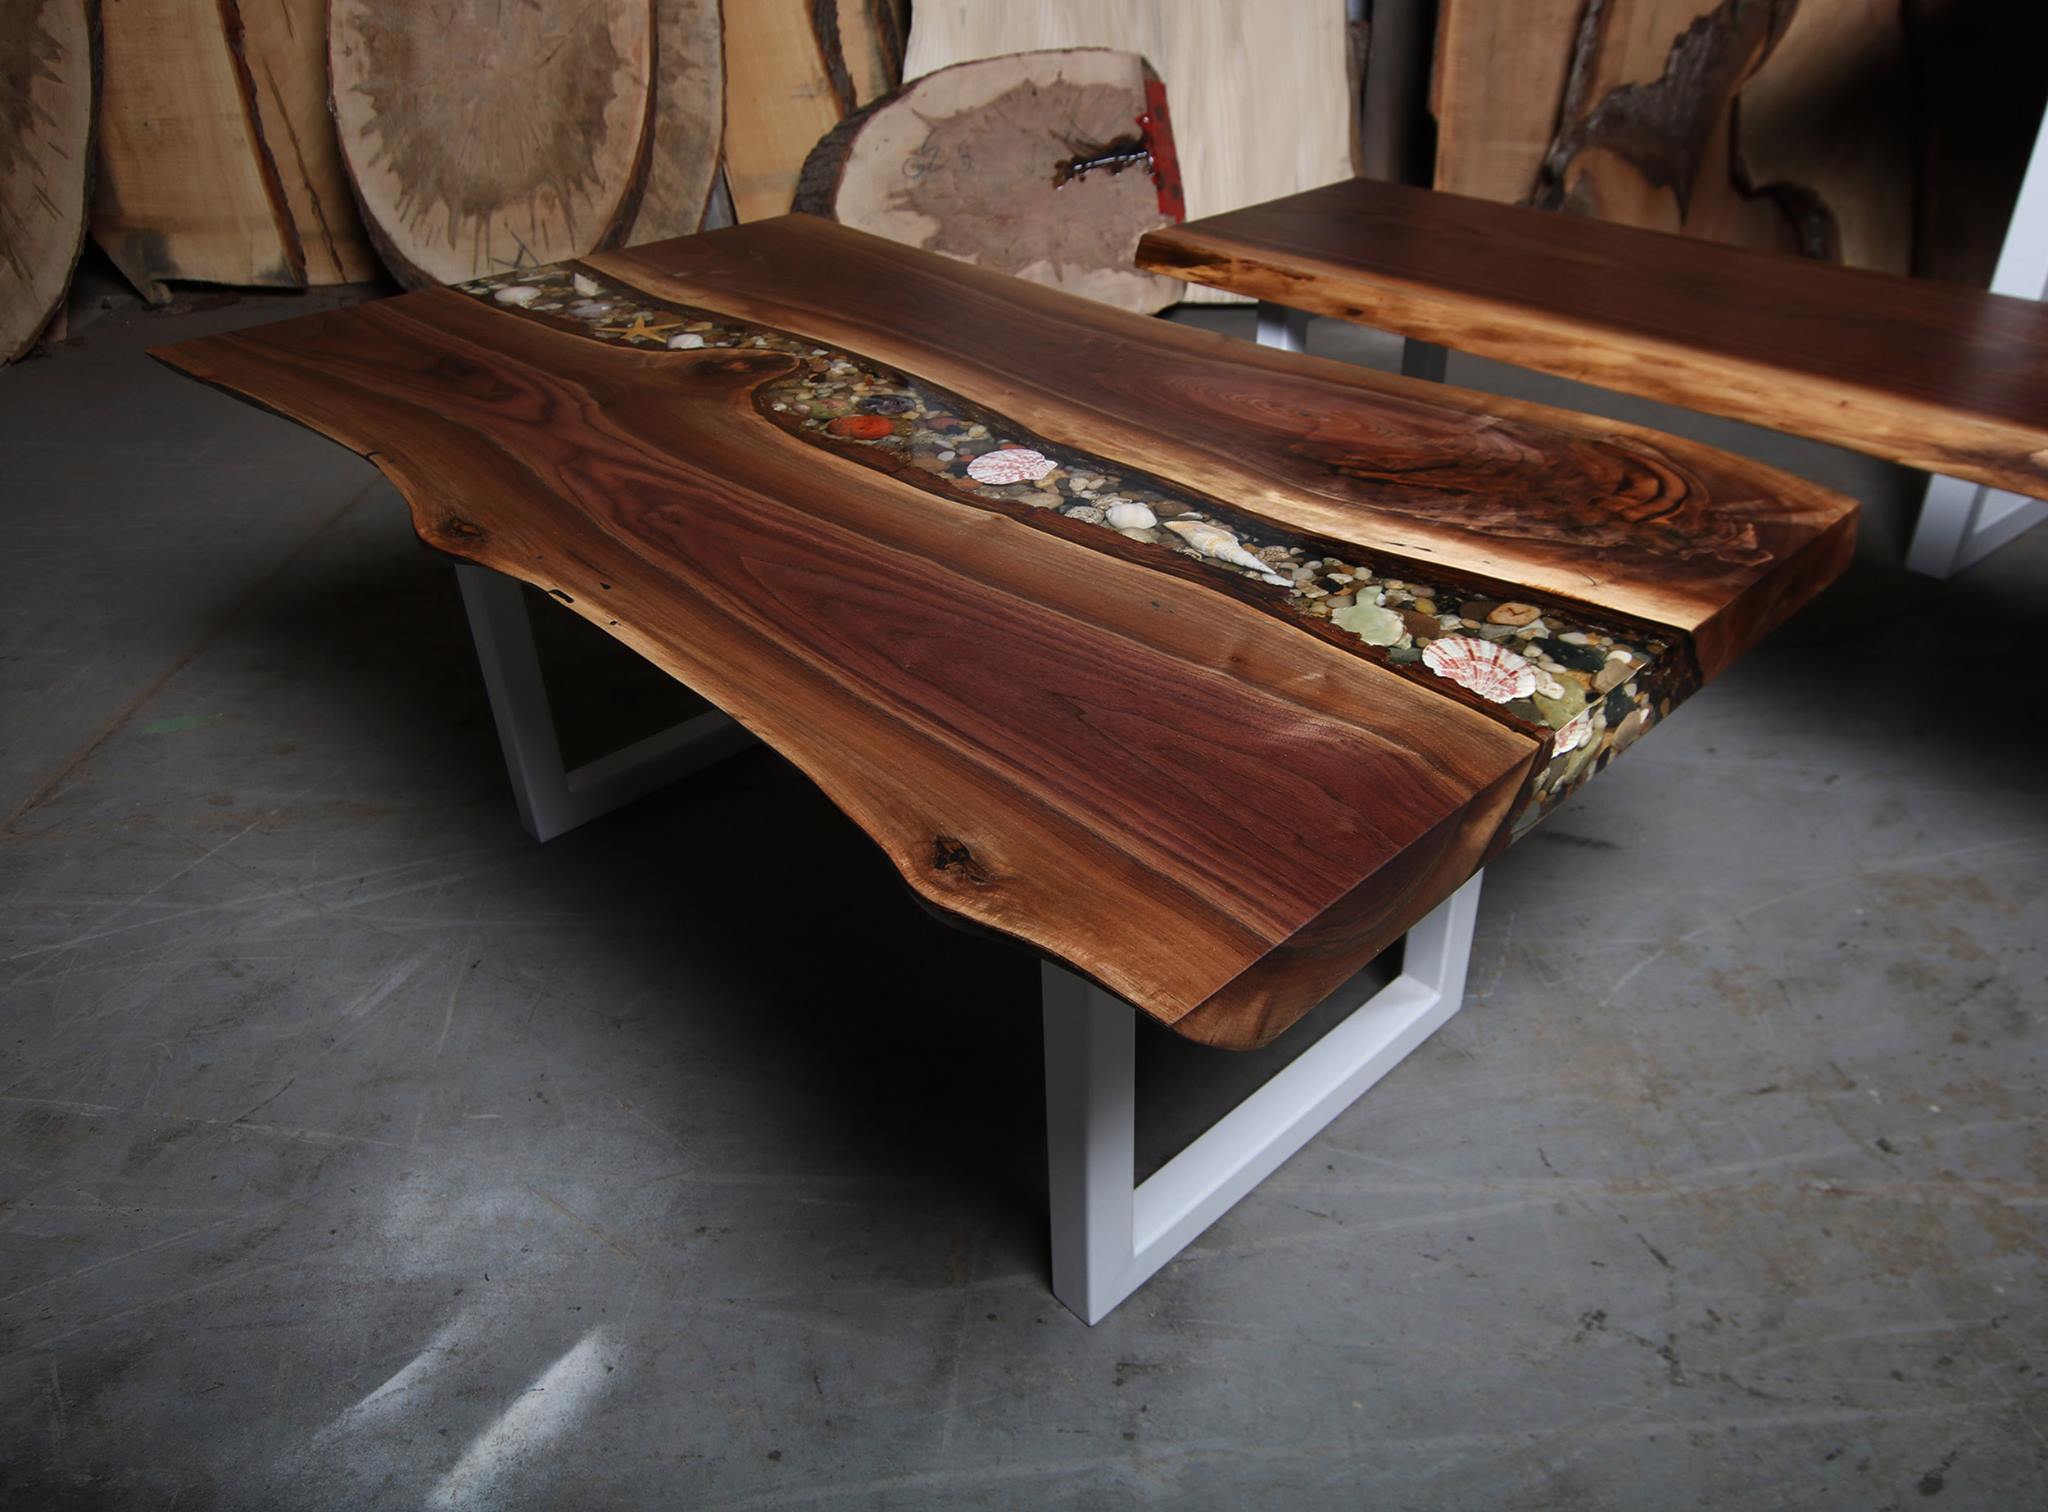 Live Edge Walnut Coffee Table with Rock filled River - Anglewood Furniture